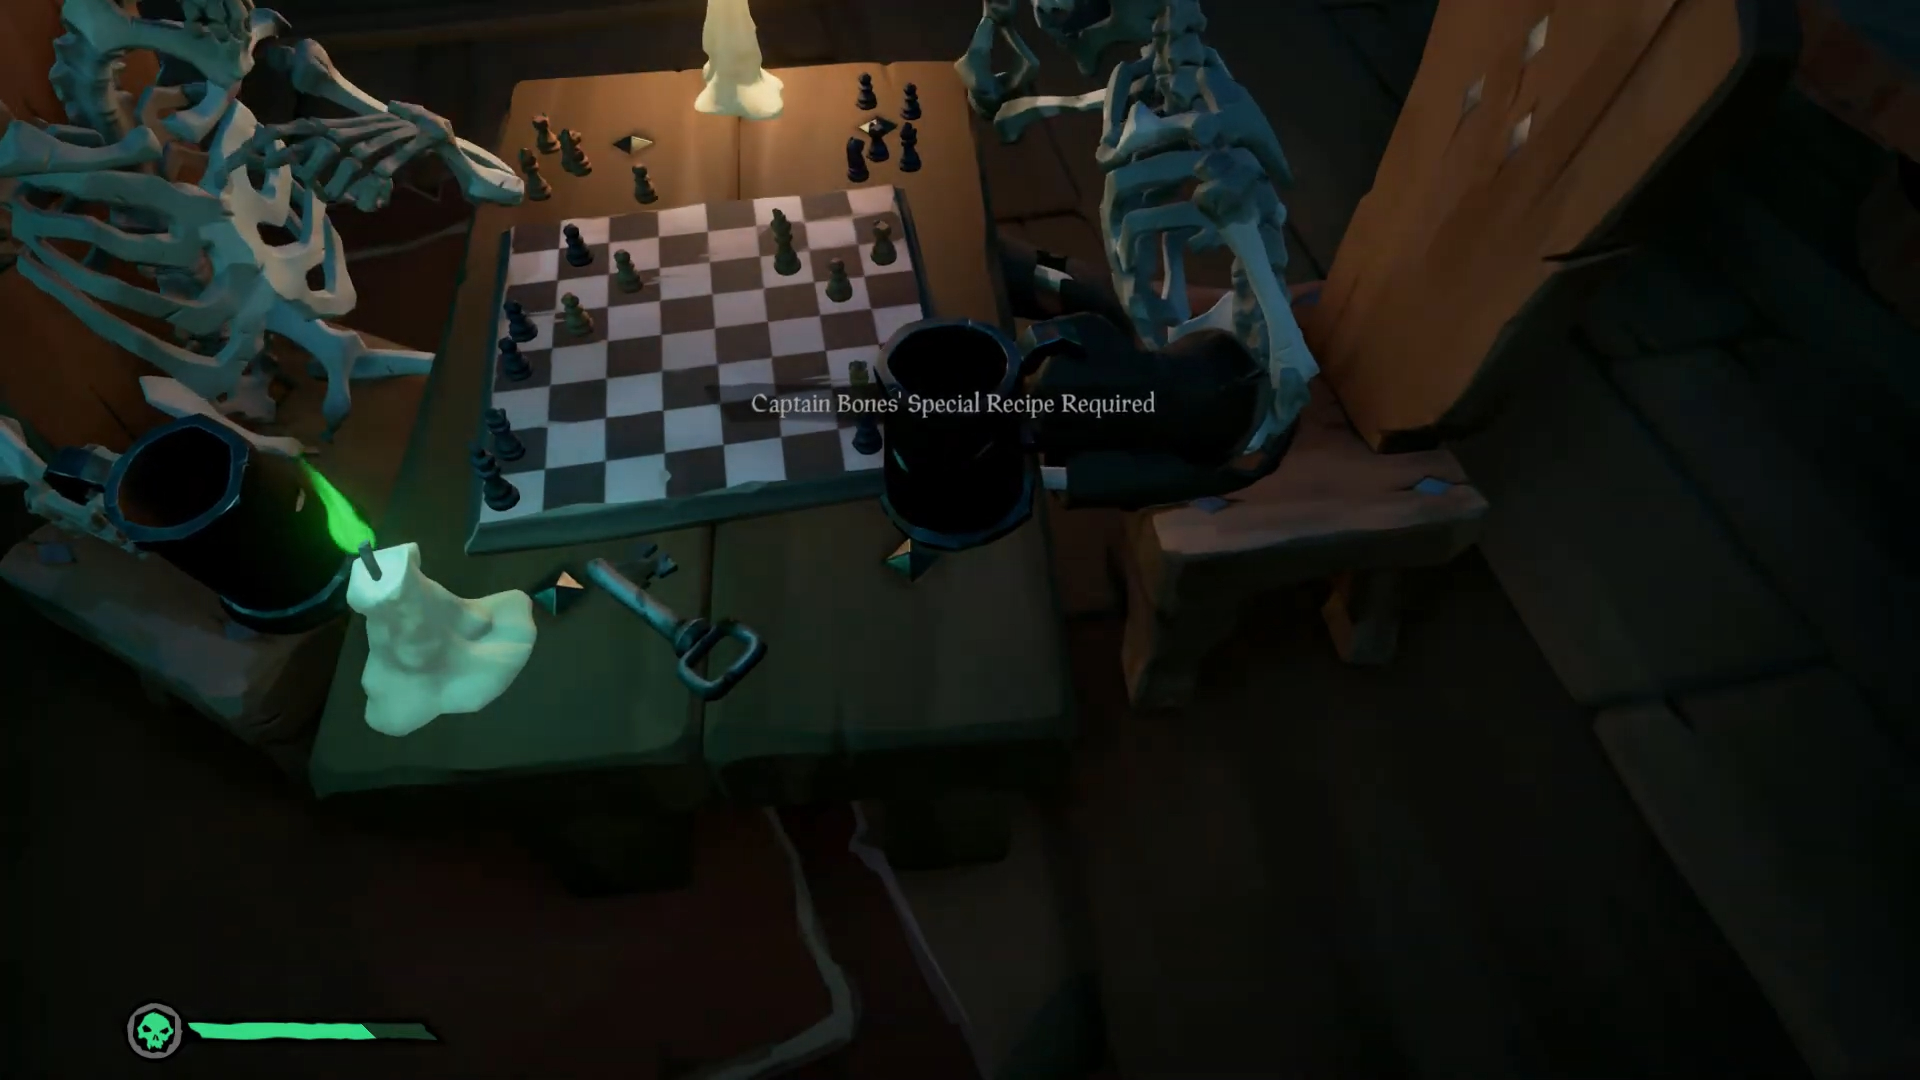 Two skeletons playing chess in Sea of Thieves.